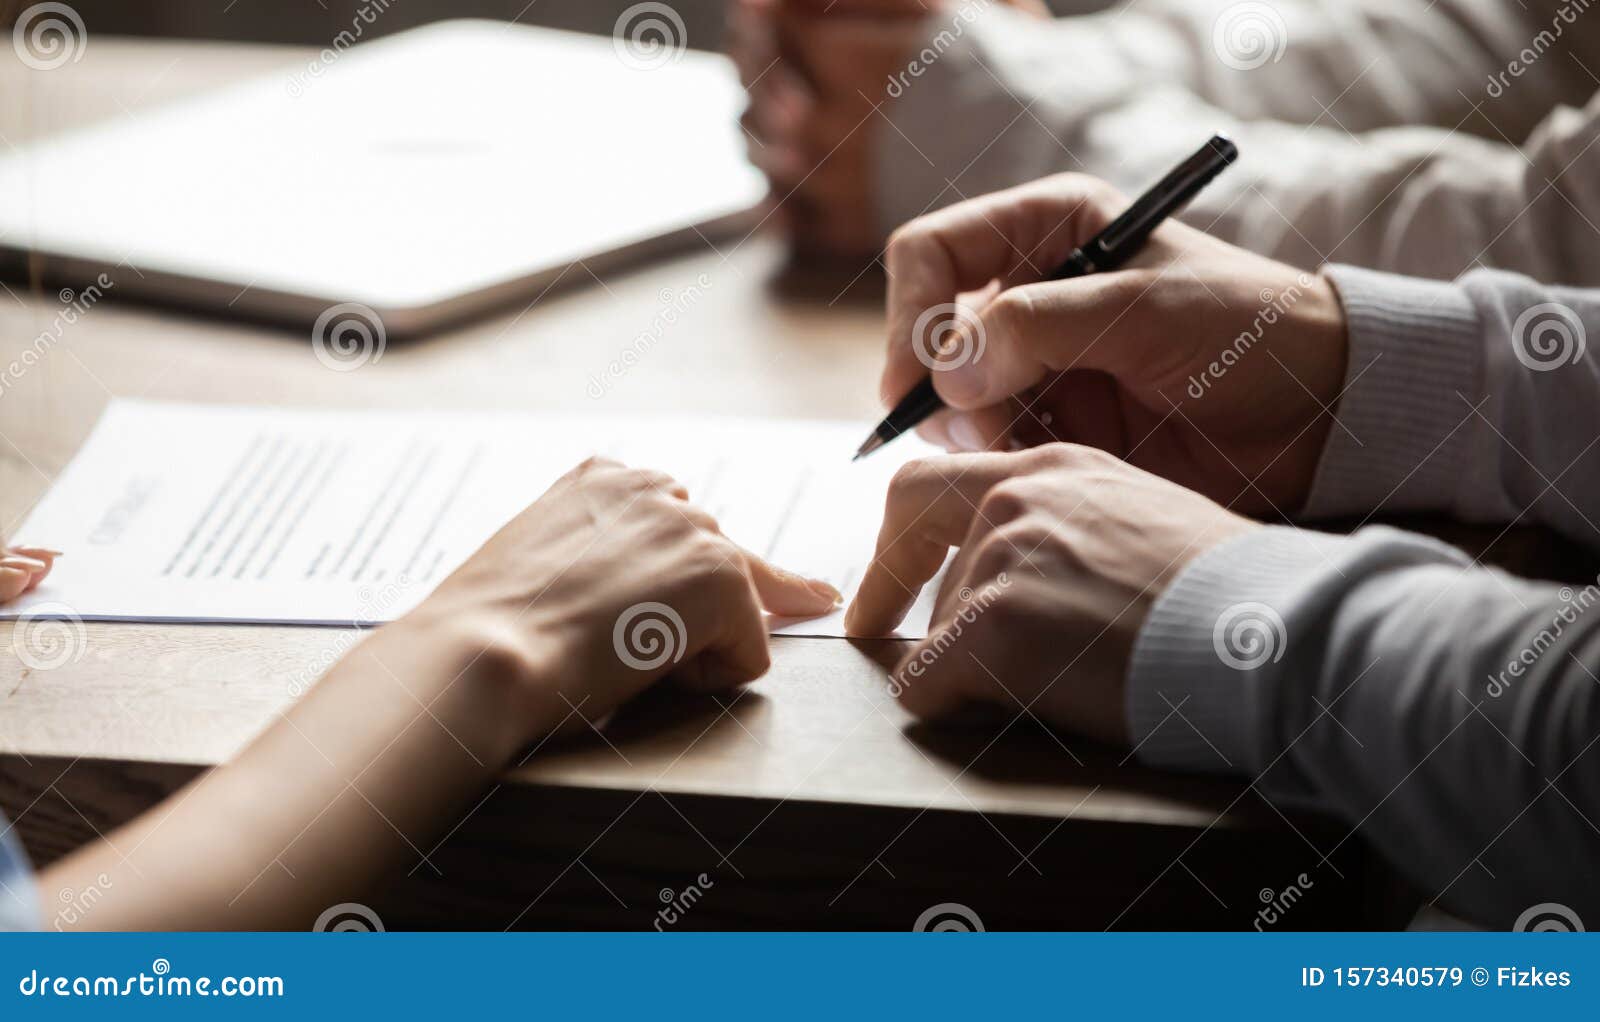 solicitor pointing at contract showing client where to write signature